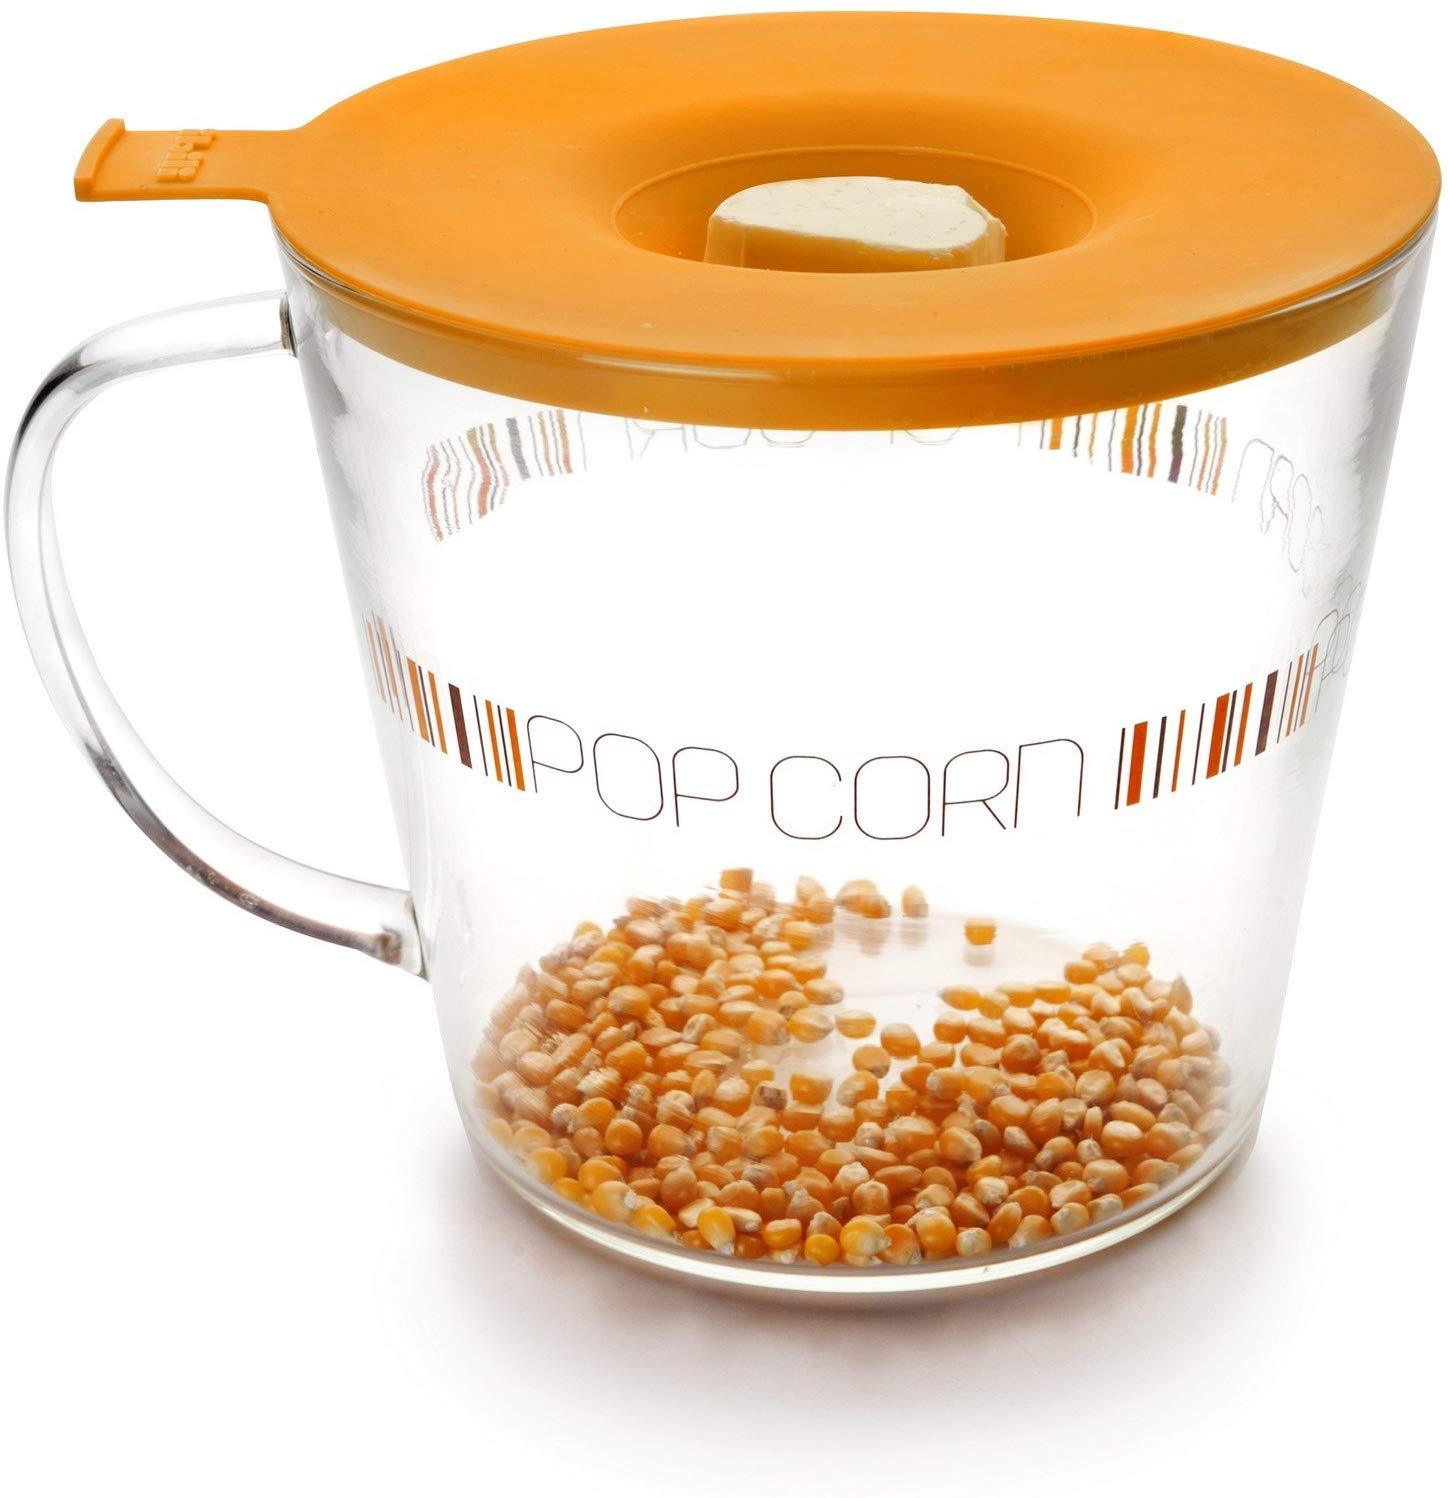 Dash Hot Air Popcorn Popper Maker with Measuring Cup to Portion Poppin –  KATEI UAE